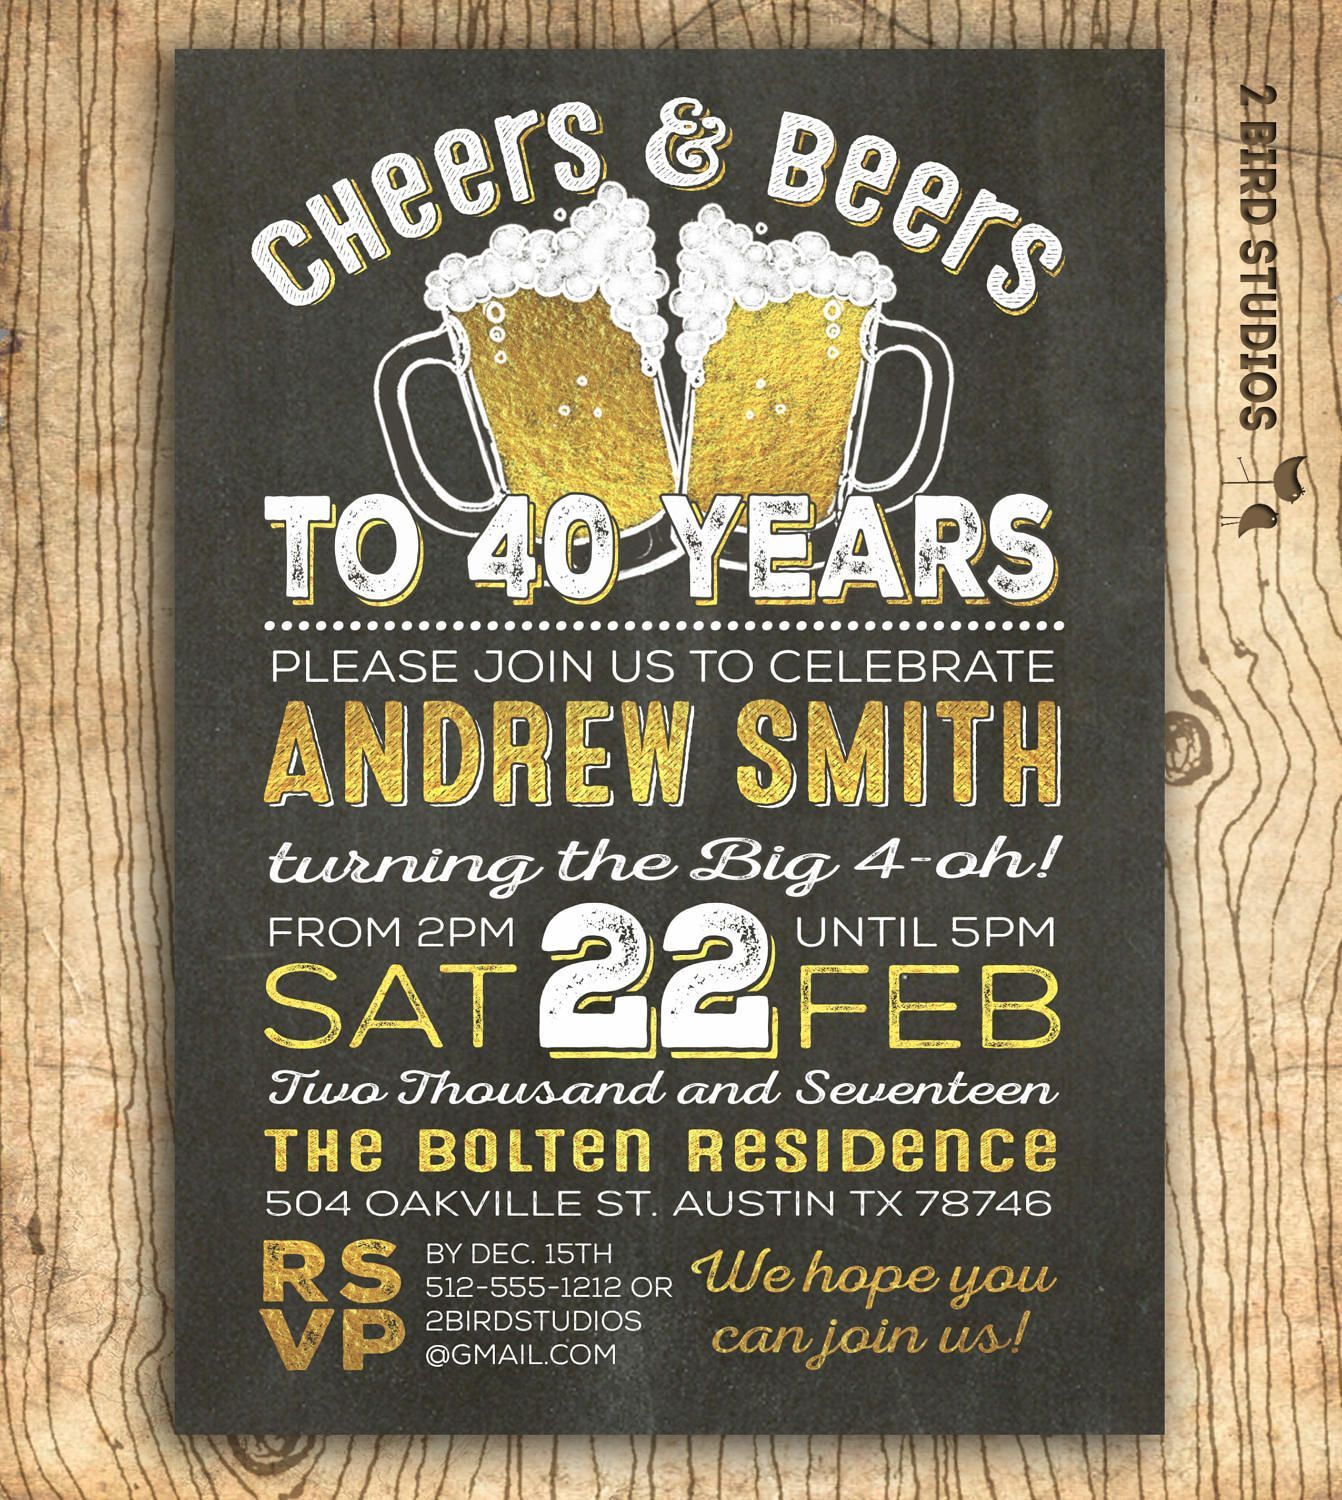 40th Birthday Invitations For Men
 40th birthday invitation for men Cheers & beers to 40 years